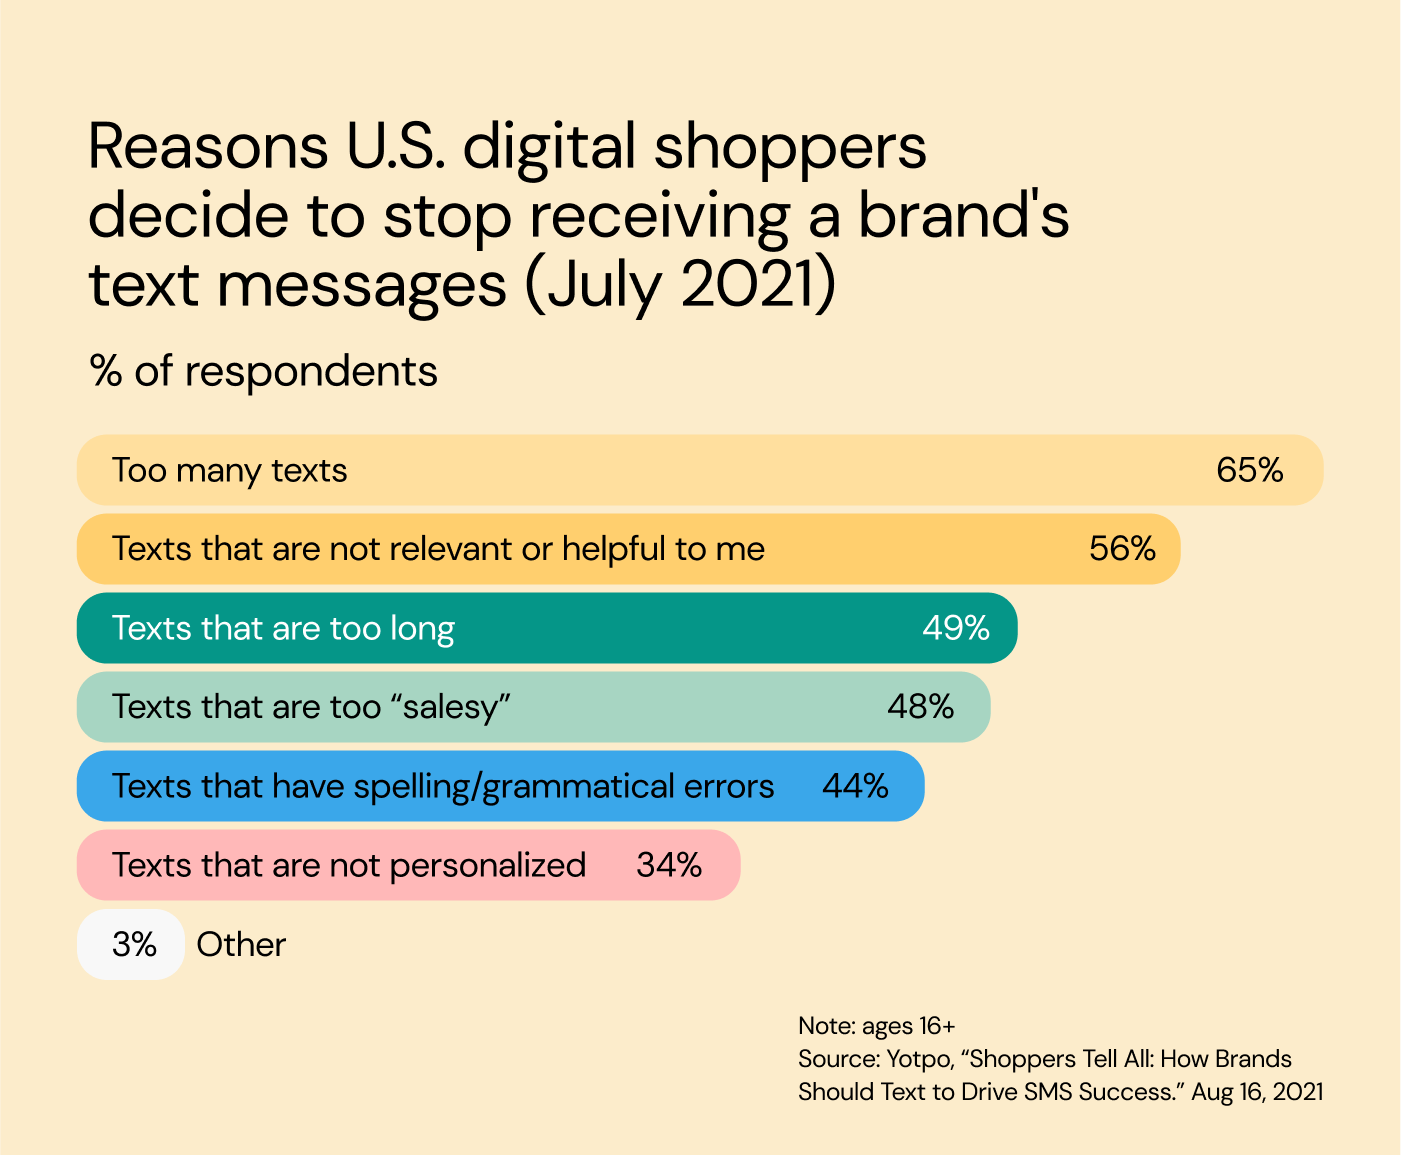 SMS for retail reasons U.S. digital shoppers decide to stop receiving a brand's text messages 